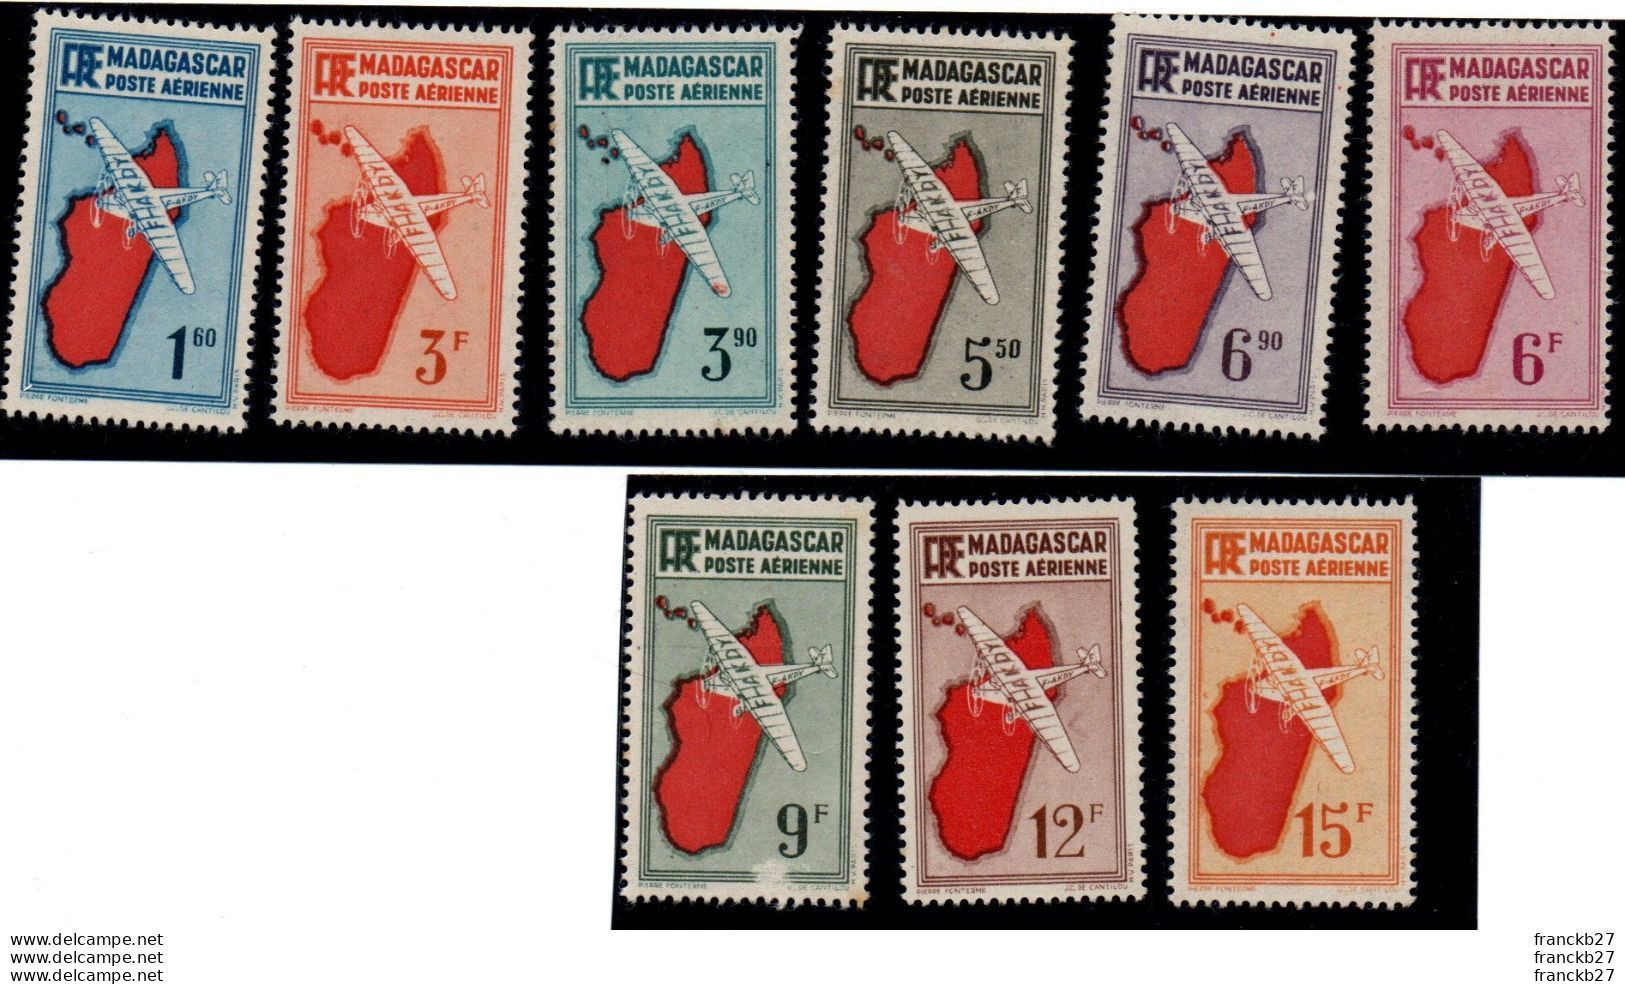 Madagascar - Poste Aérienne - 9 Timbres - 1.6 - 3 3.9 - 5.5 - 6.9 - 6 - 9 - 12 - 15 F - Unused Stamps